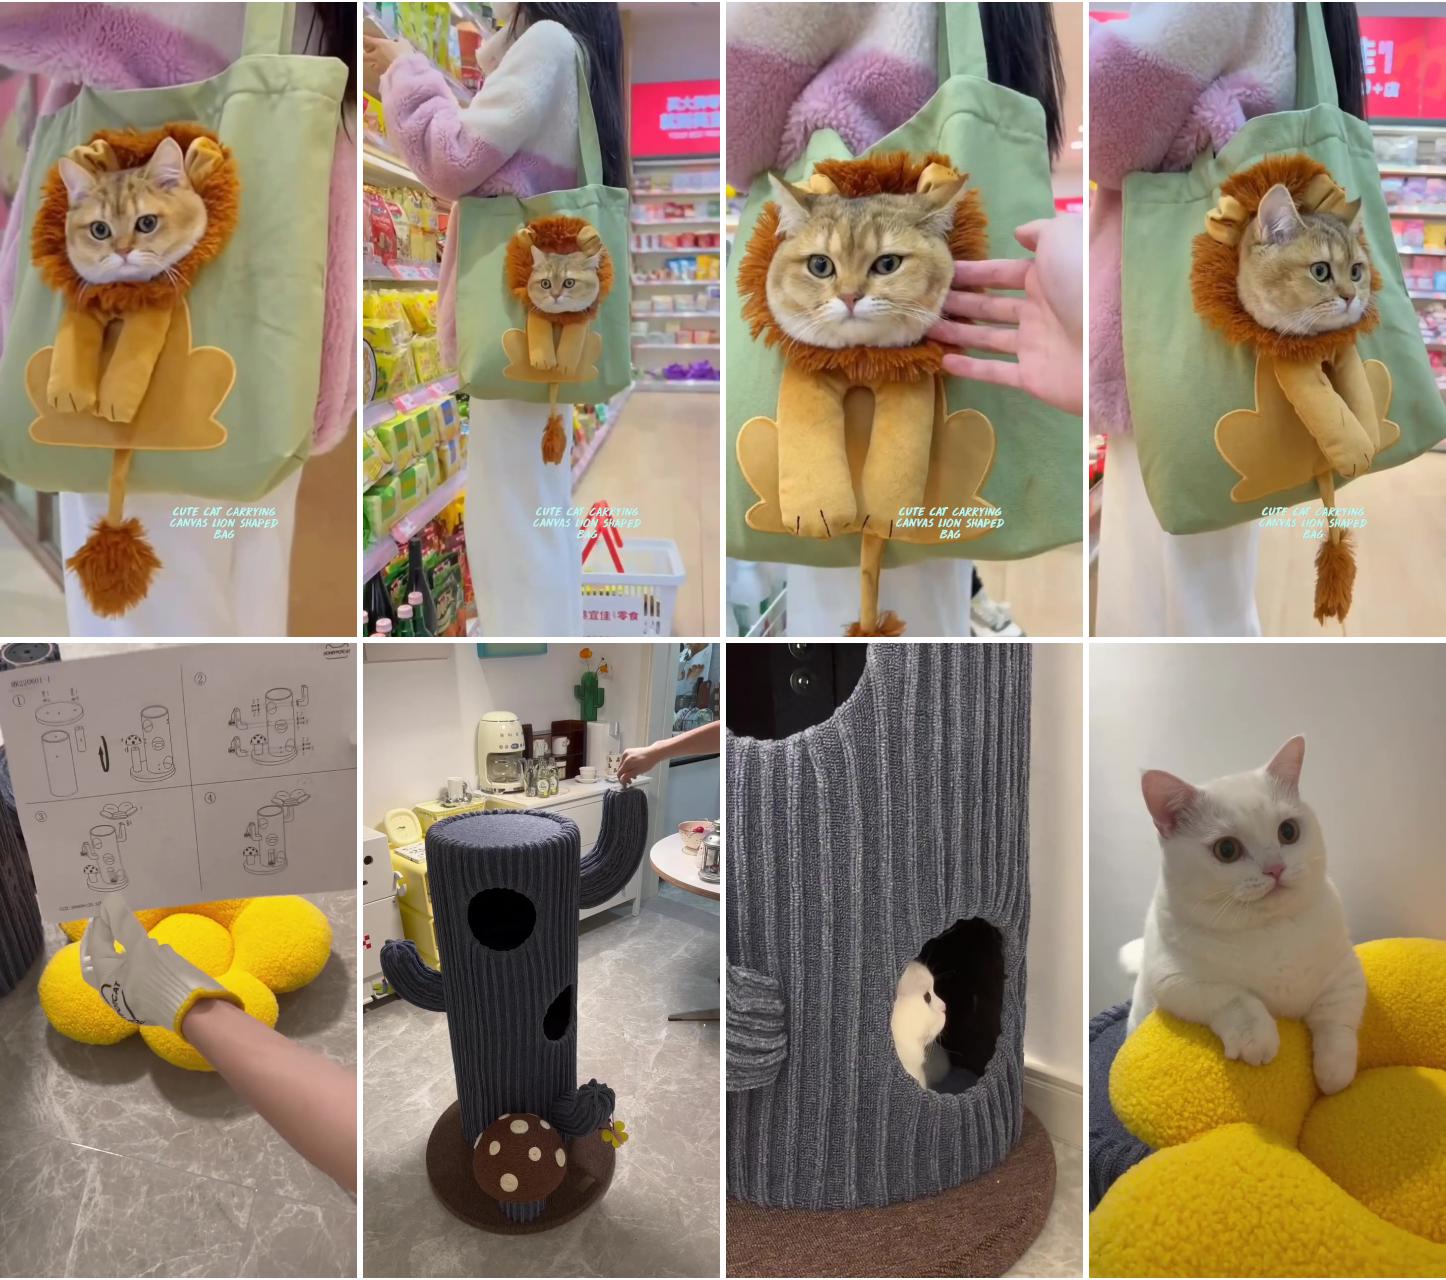 Cute cat carrying canvas lion shaped bag; meow cat tree, flower and mushroom